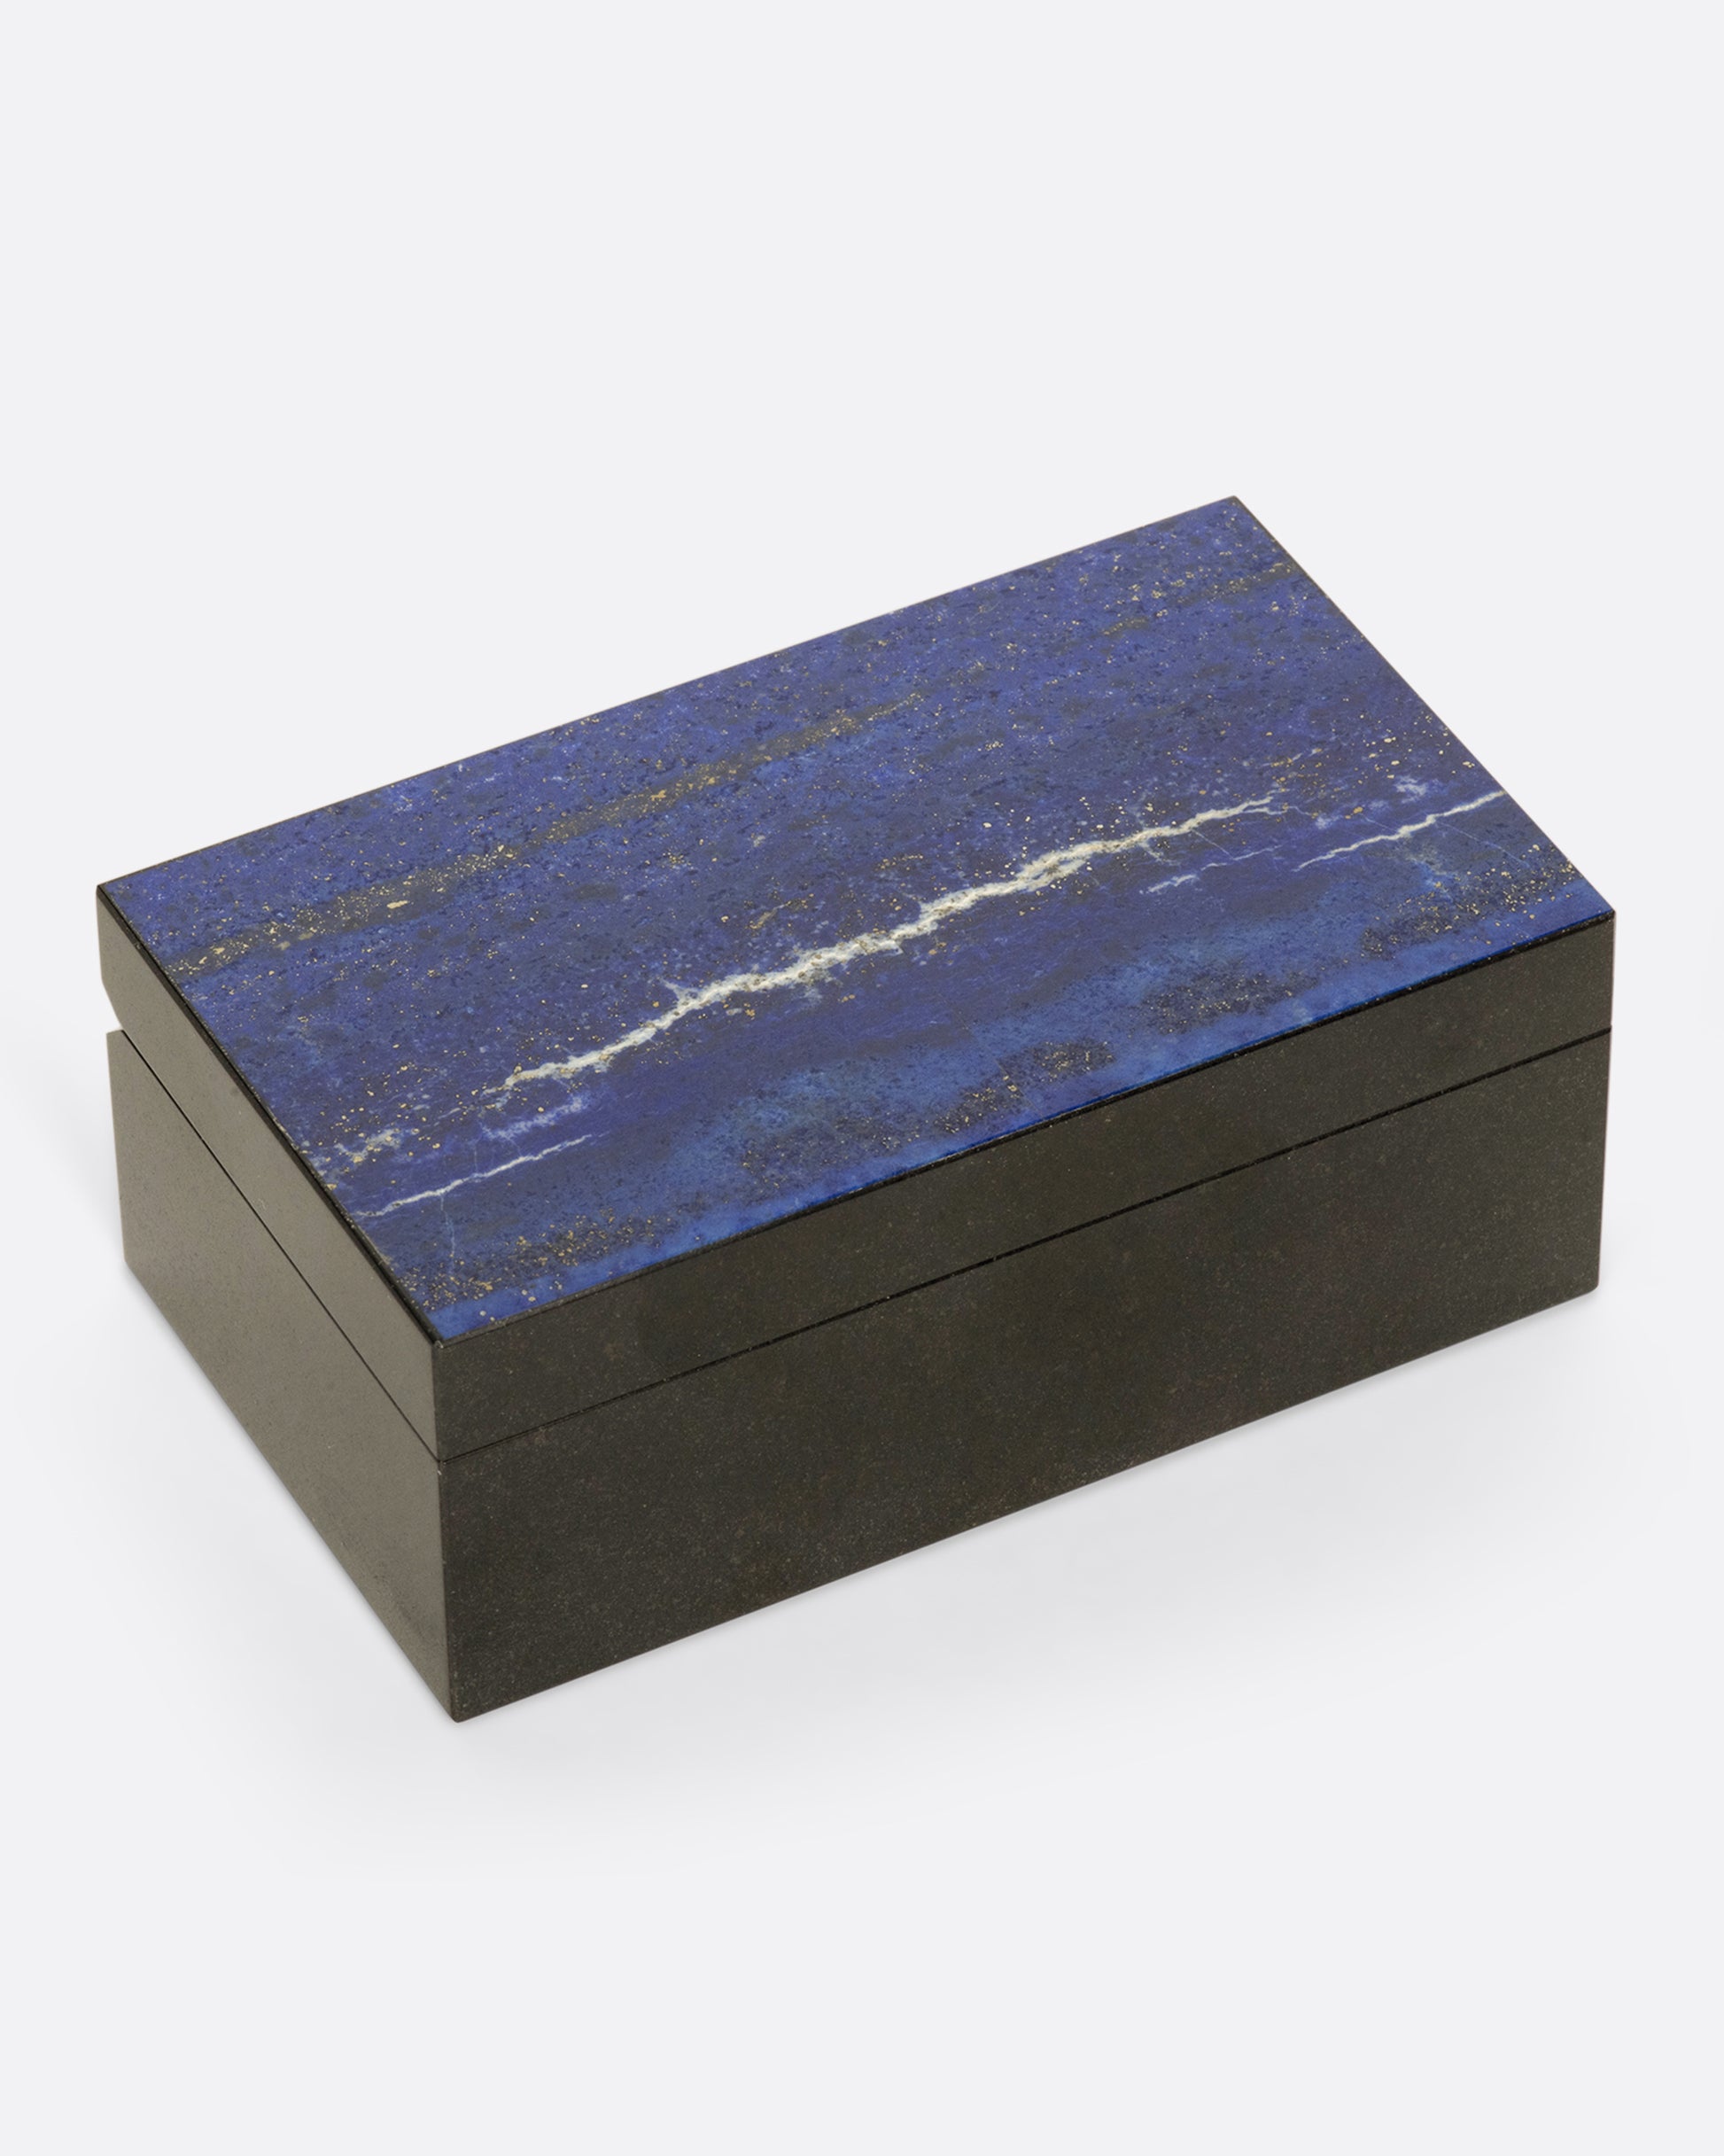 A hinged box made from dark igneous rock with a deep blue layer of lapis on the lid.